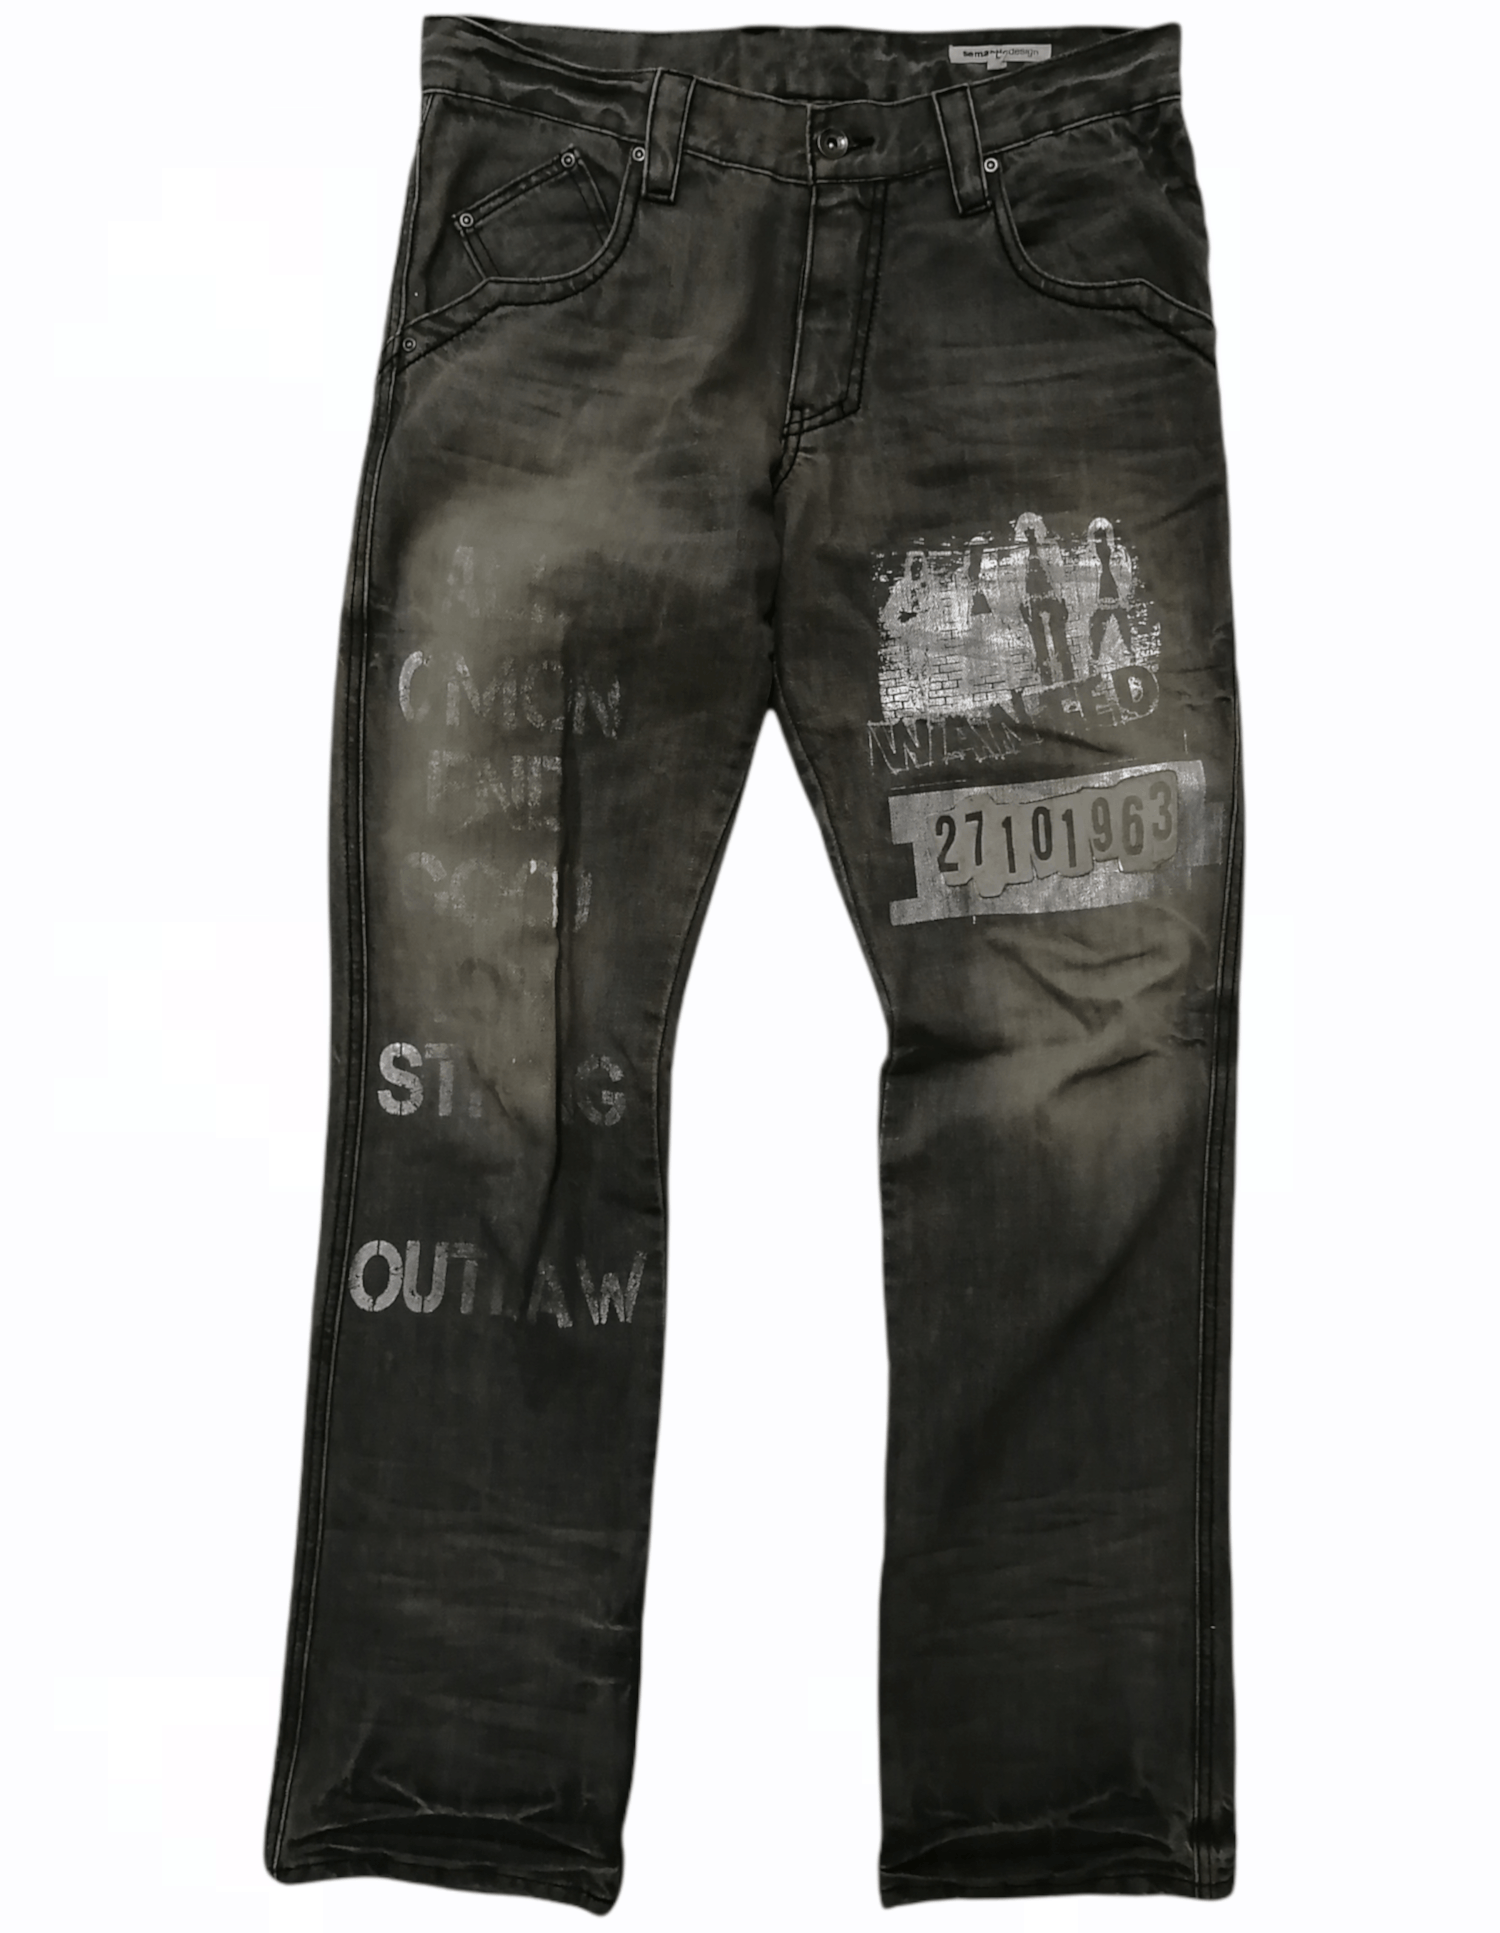 Pre-owned Distressed Denim Semantic Design Wanted 27101963 Printed Style Jeans In Grey